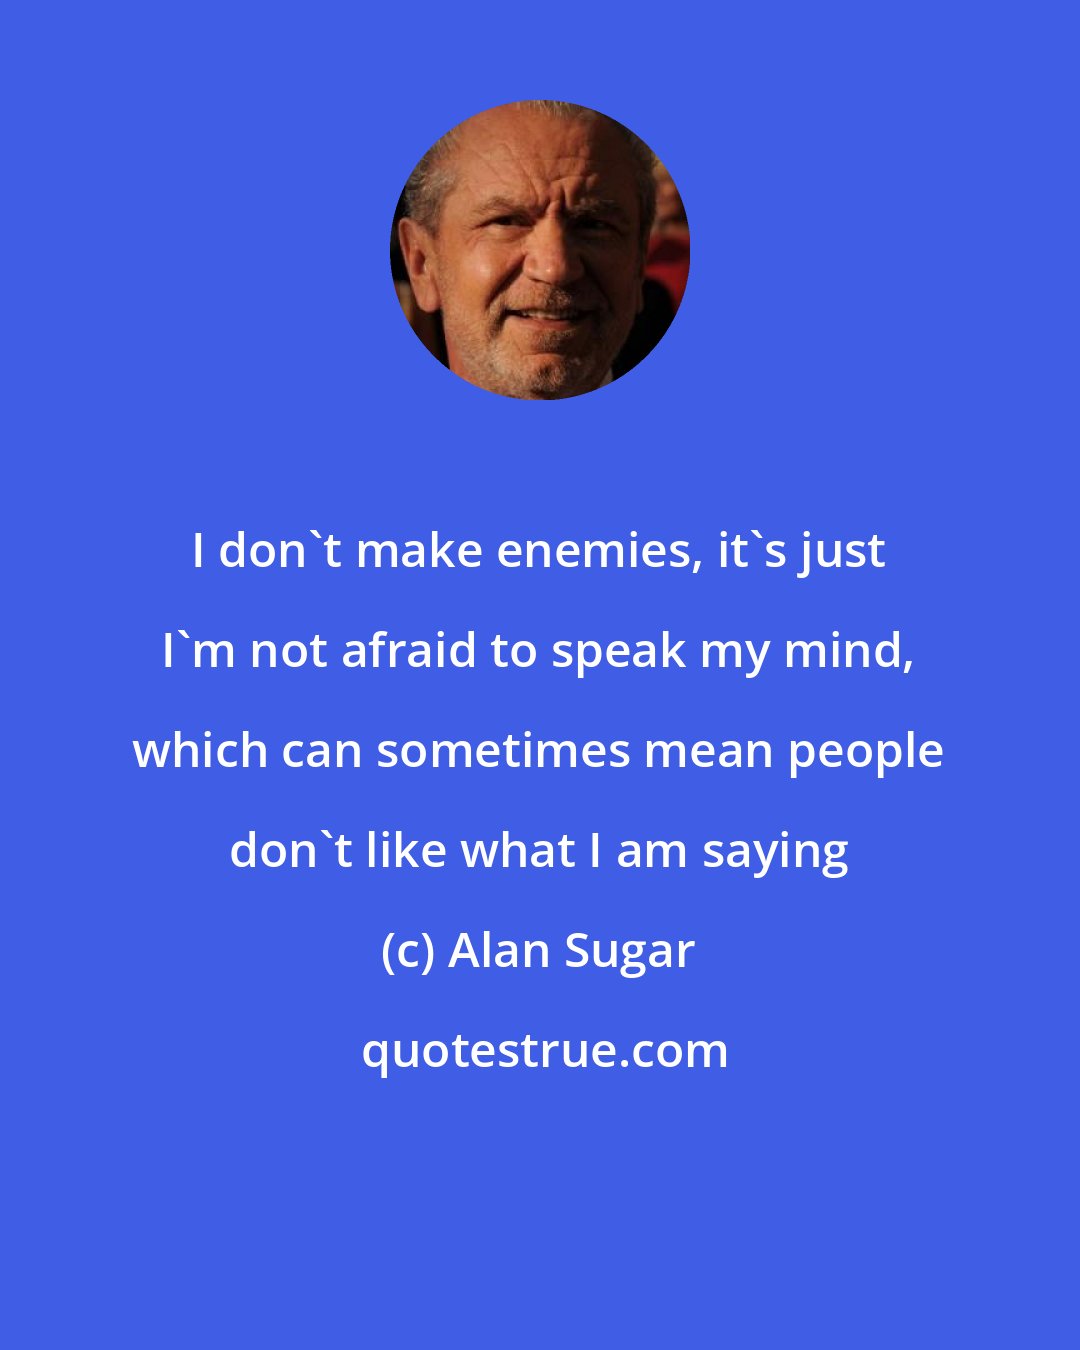 Alan Sugar: I don't make enemies, it's just I'm not afraid to speak my mind, which can sometimes mean people don't like what I am saying